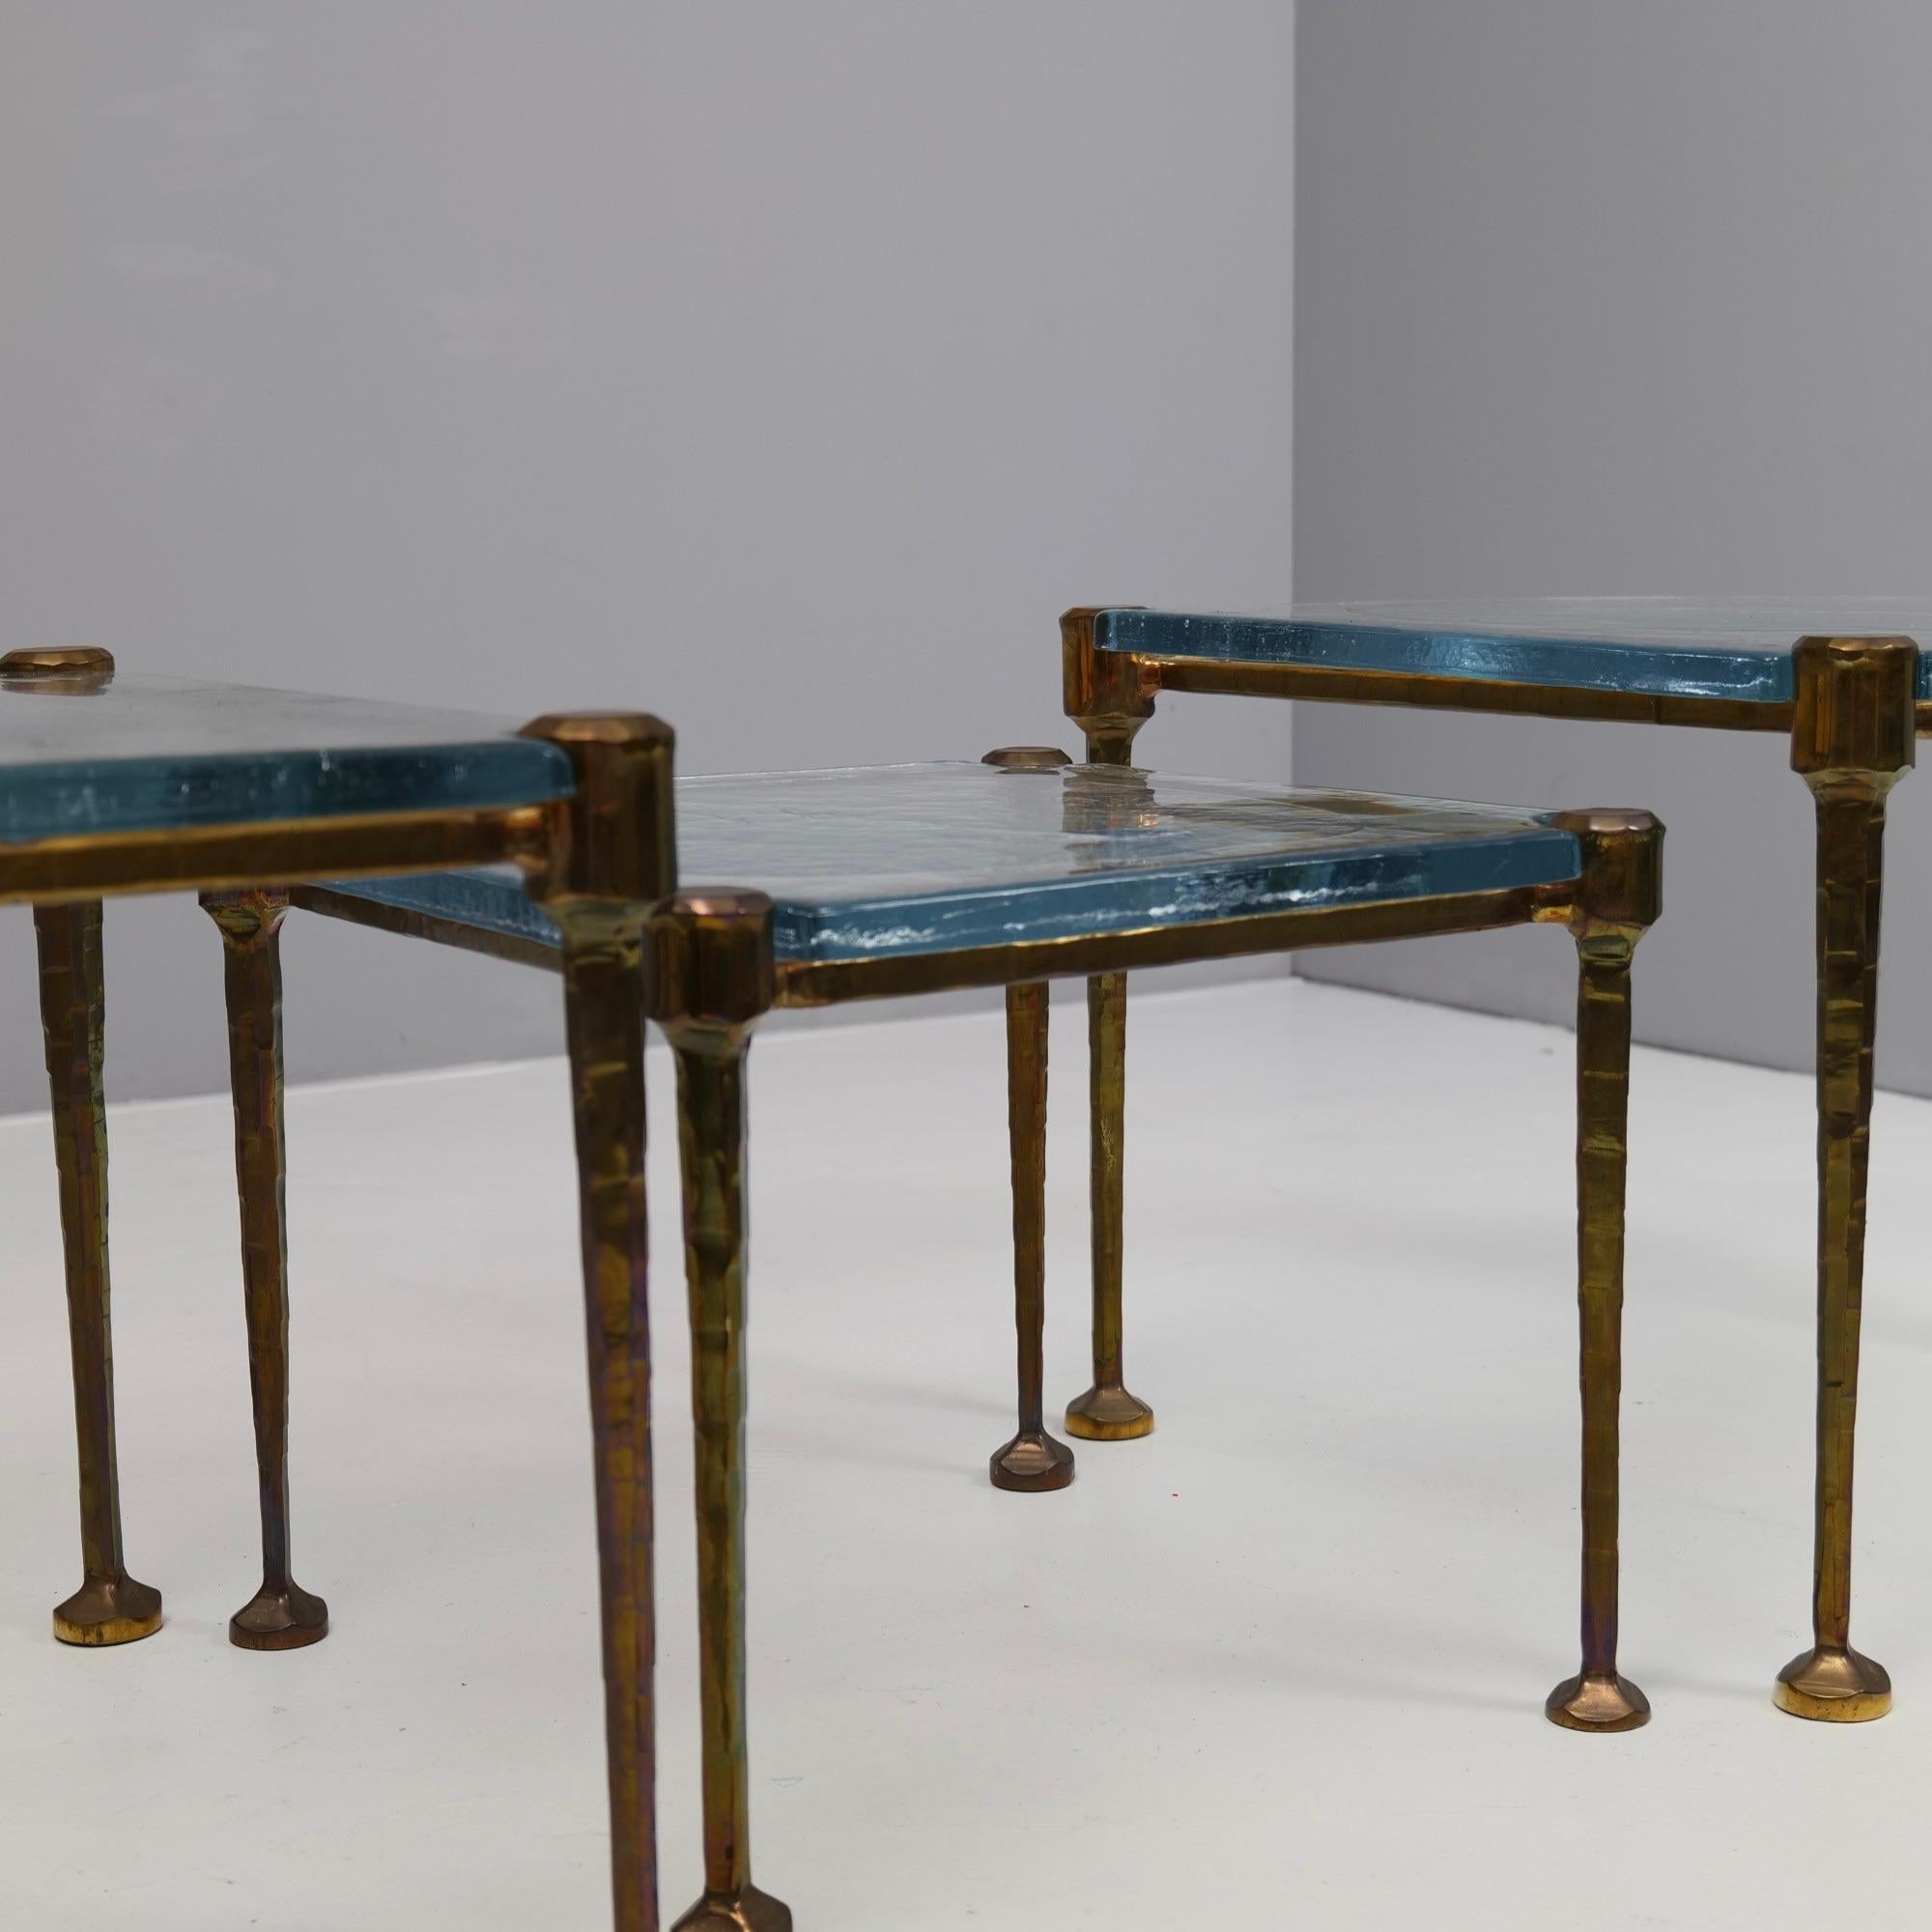 forged bronze tables with blue cast glass - 1980s brutalist 2